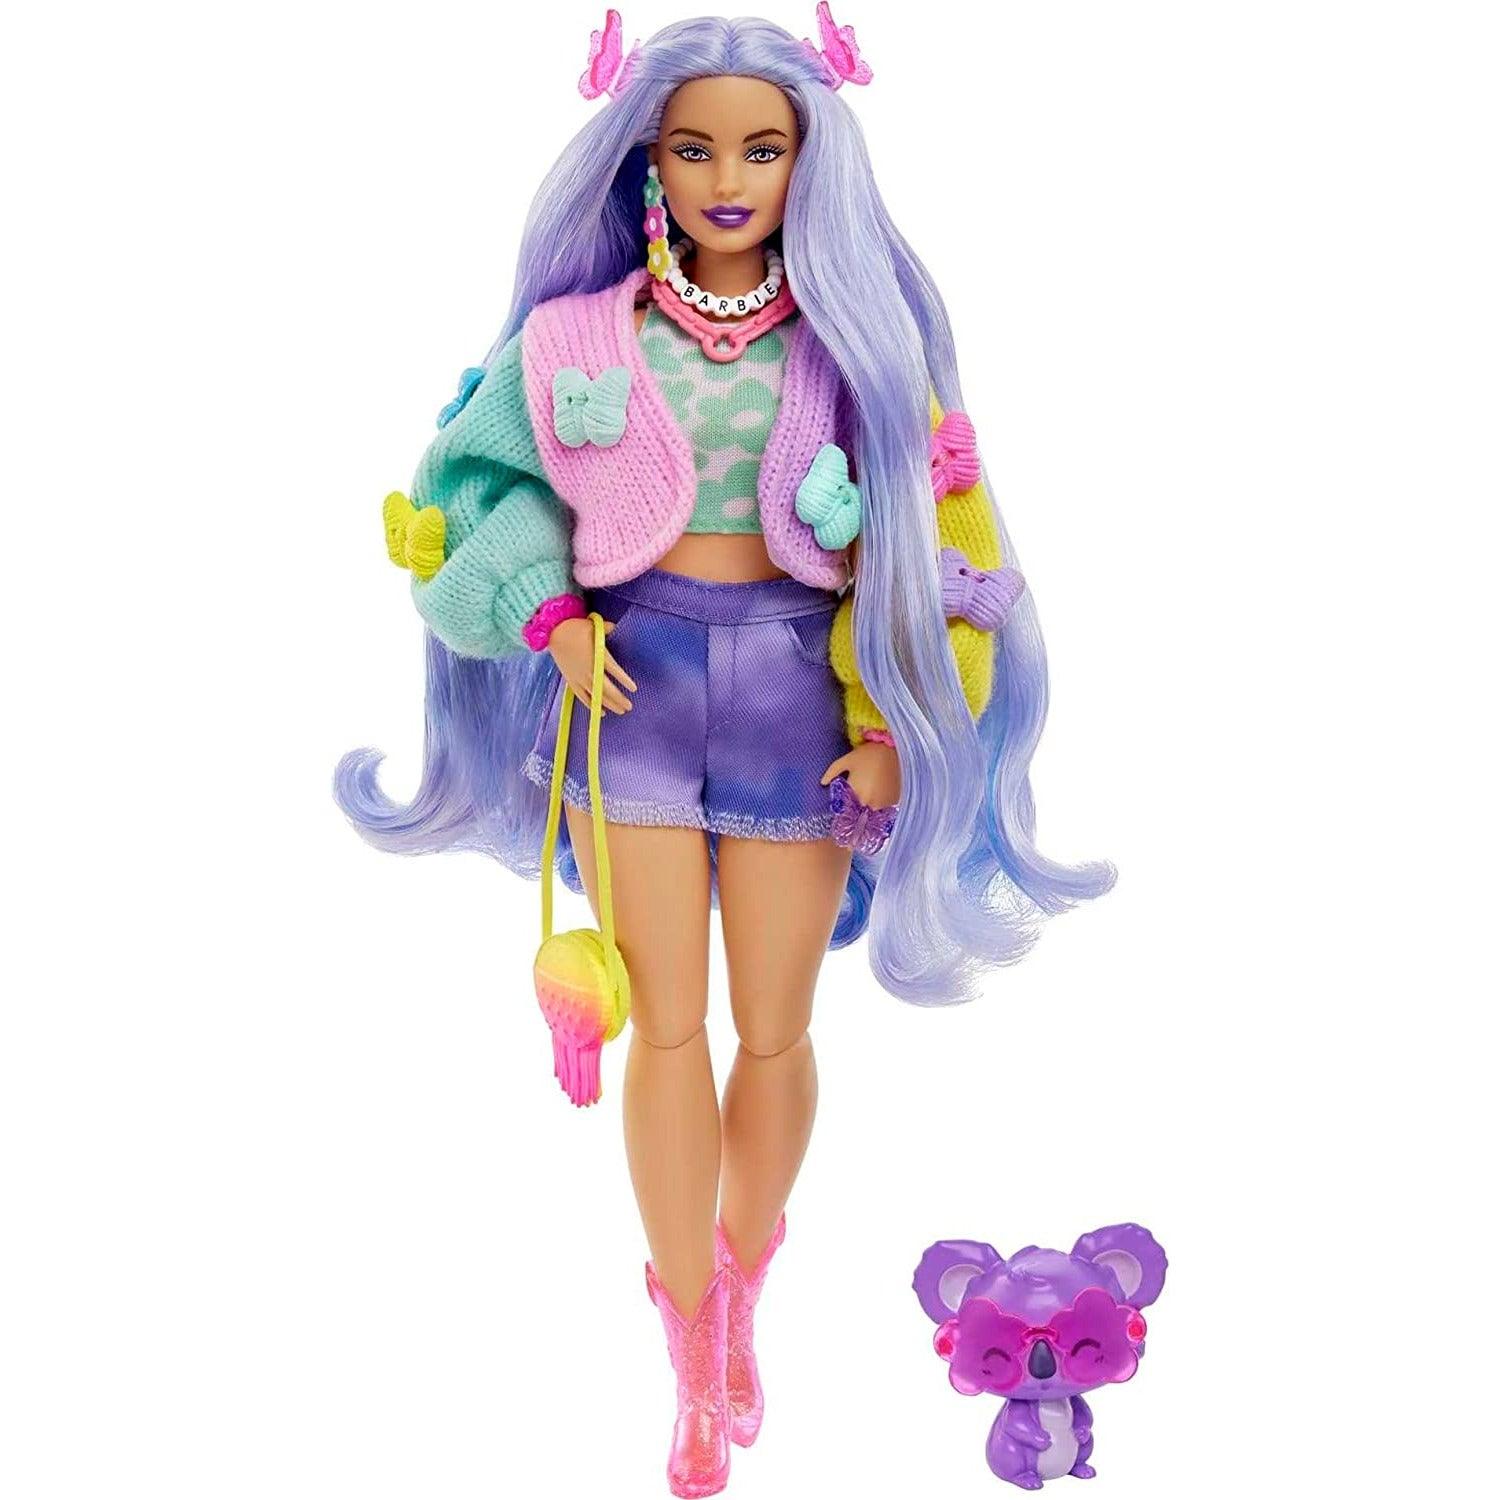 Barbie Extra #20 Doll & Accessories with Wavy Lavender Hair in Colorful Butterfly Sweater & Pink Boots with Pet Koala